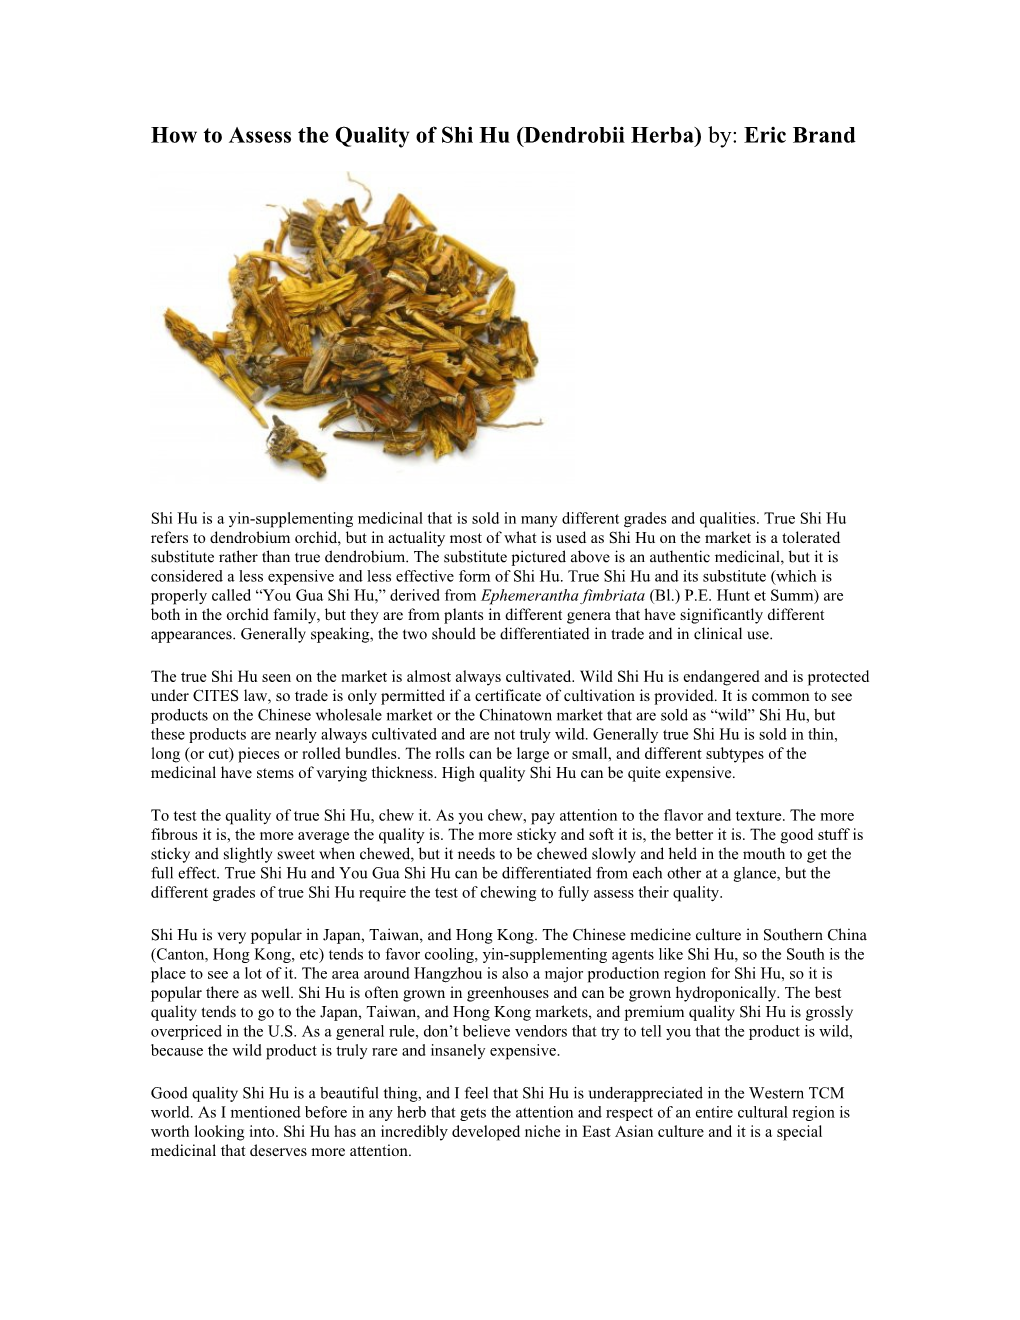 How to Assess the Quality of Shi Hu (Dendrobii Herba) By: Eric Brand